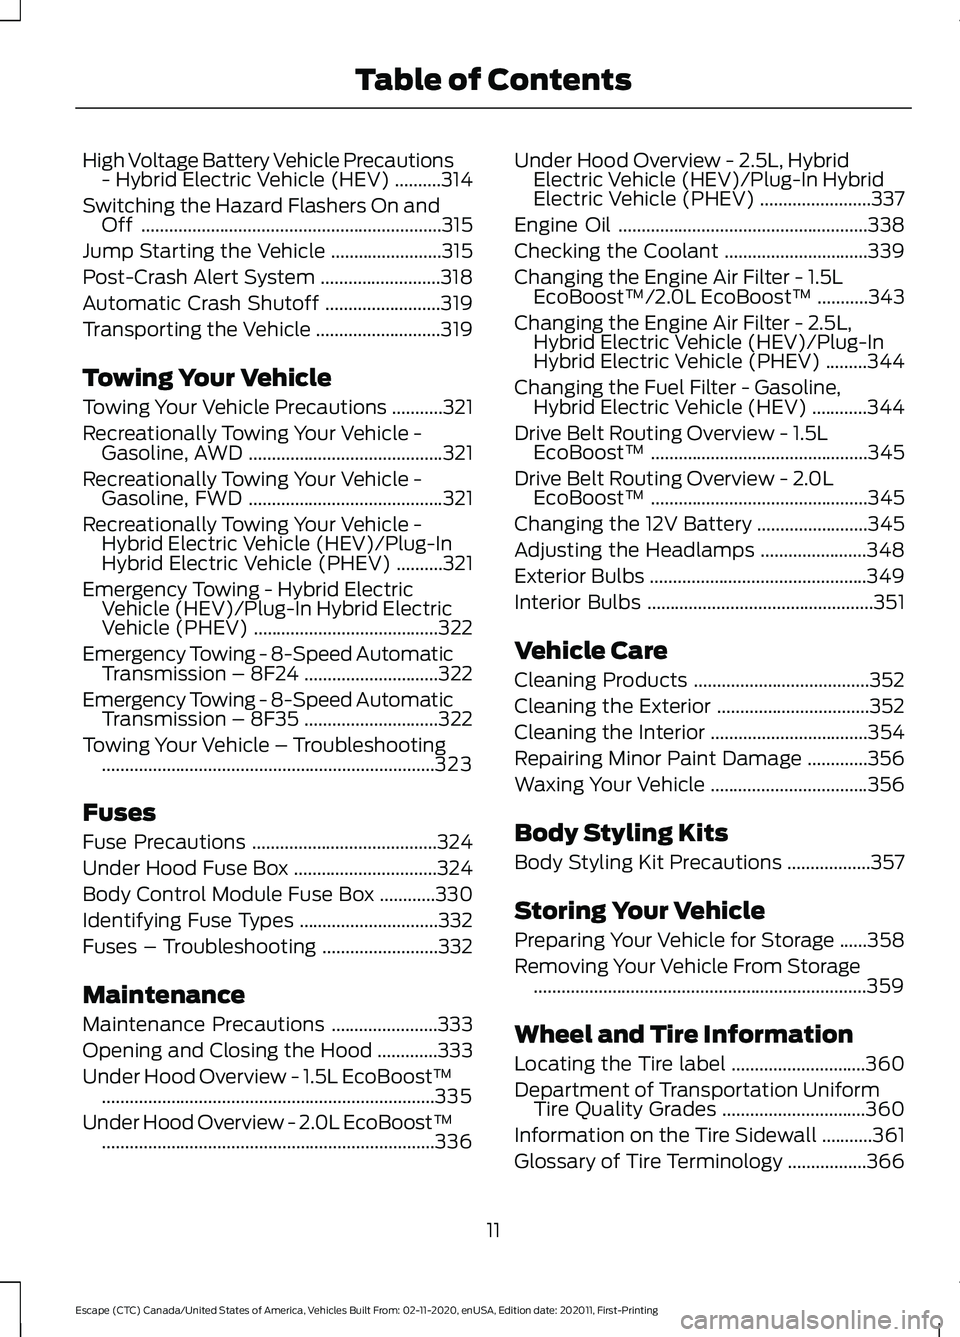 FORD ESCAPE 2021  Owners Manual High Voltage Battery Vehicle Precautions
- Hybrid Electric Vehicle (HEV) ..........314
Switching the Hazard Flashers On and Off .................................................................
315
Ju